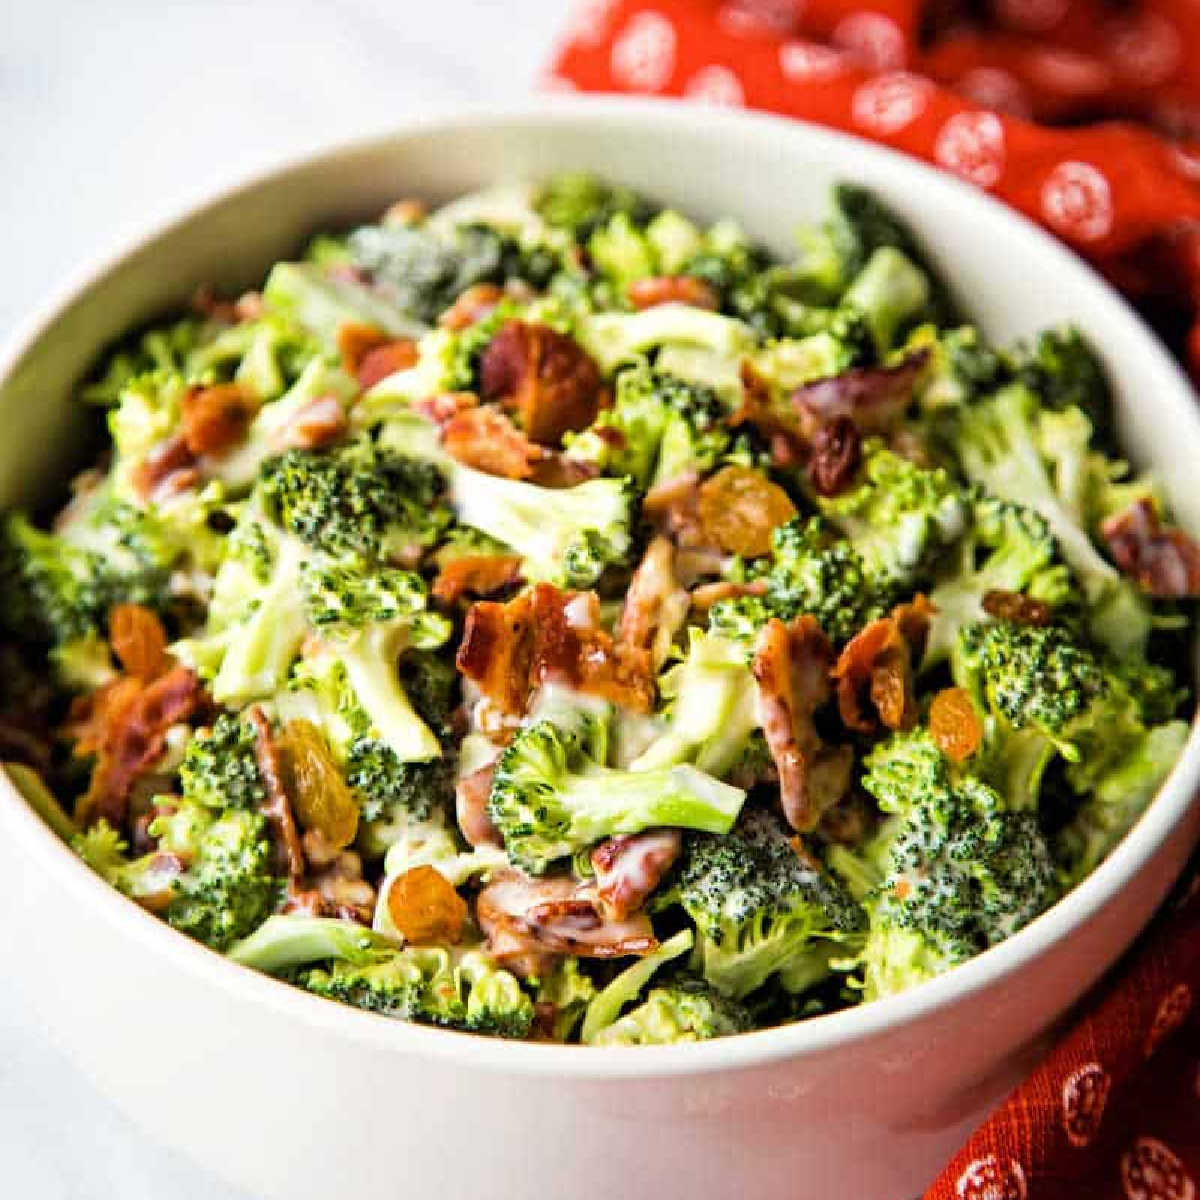 Broccoli Bacon Salad with Cranberries or Golden Raisins